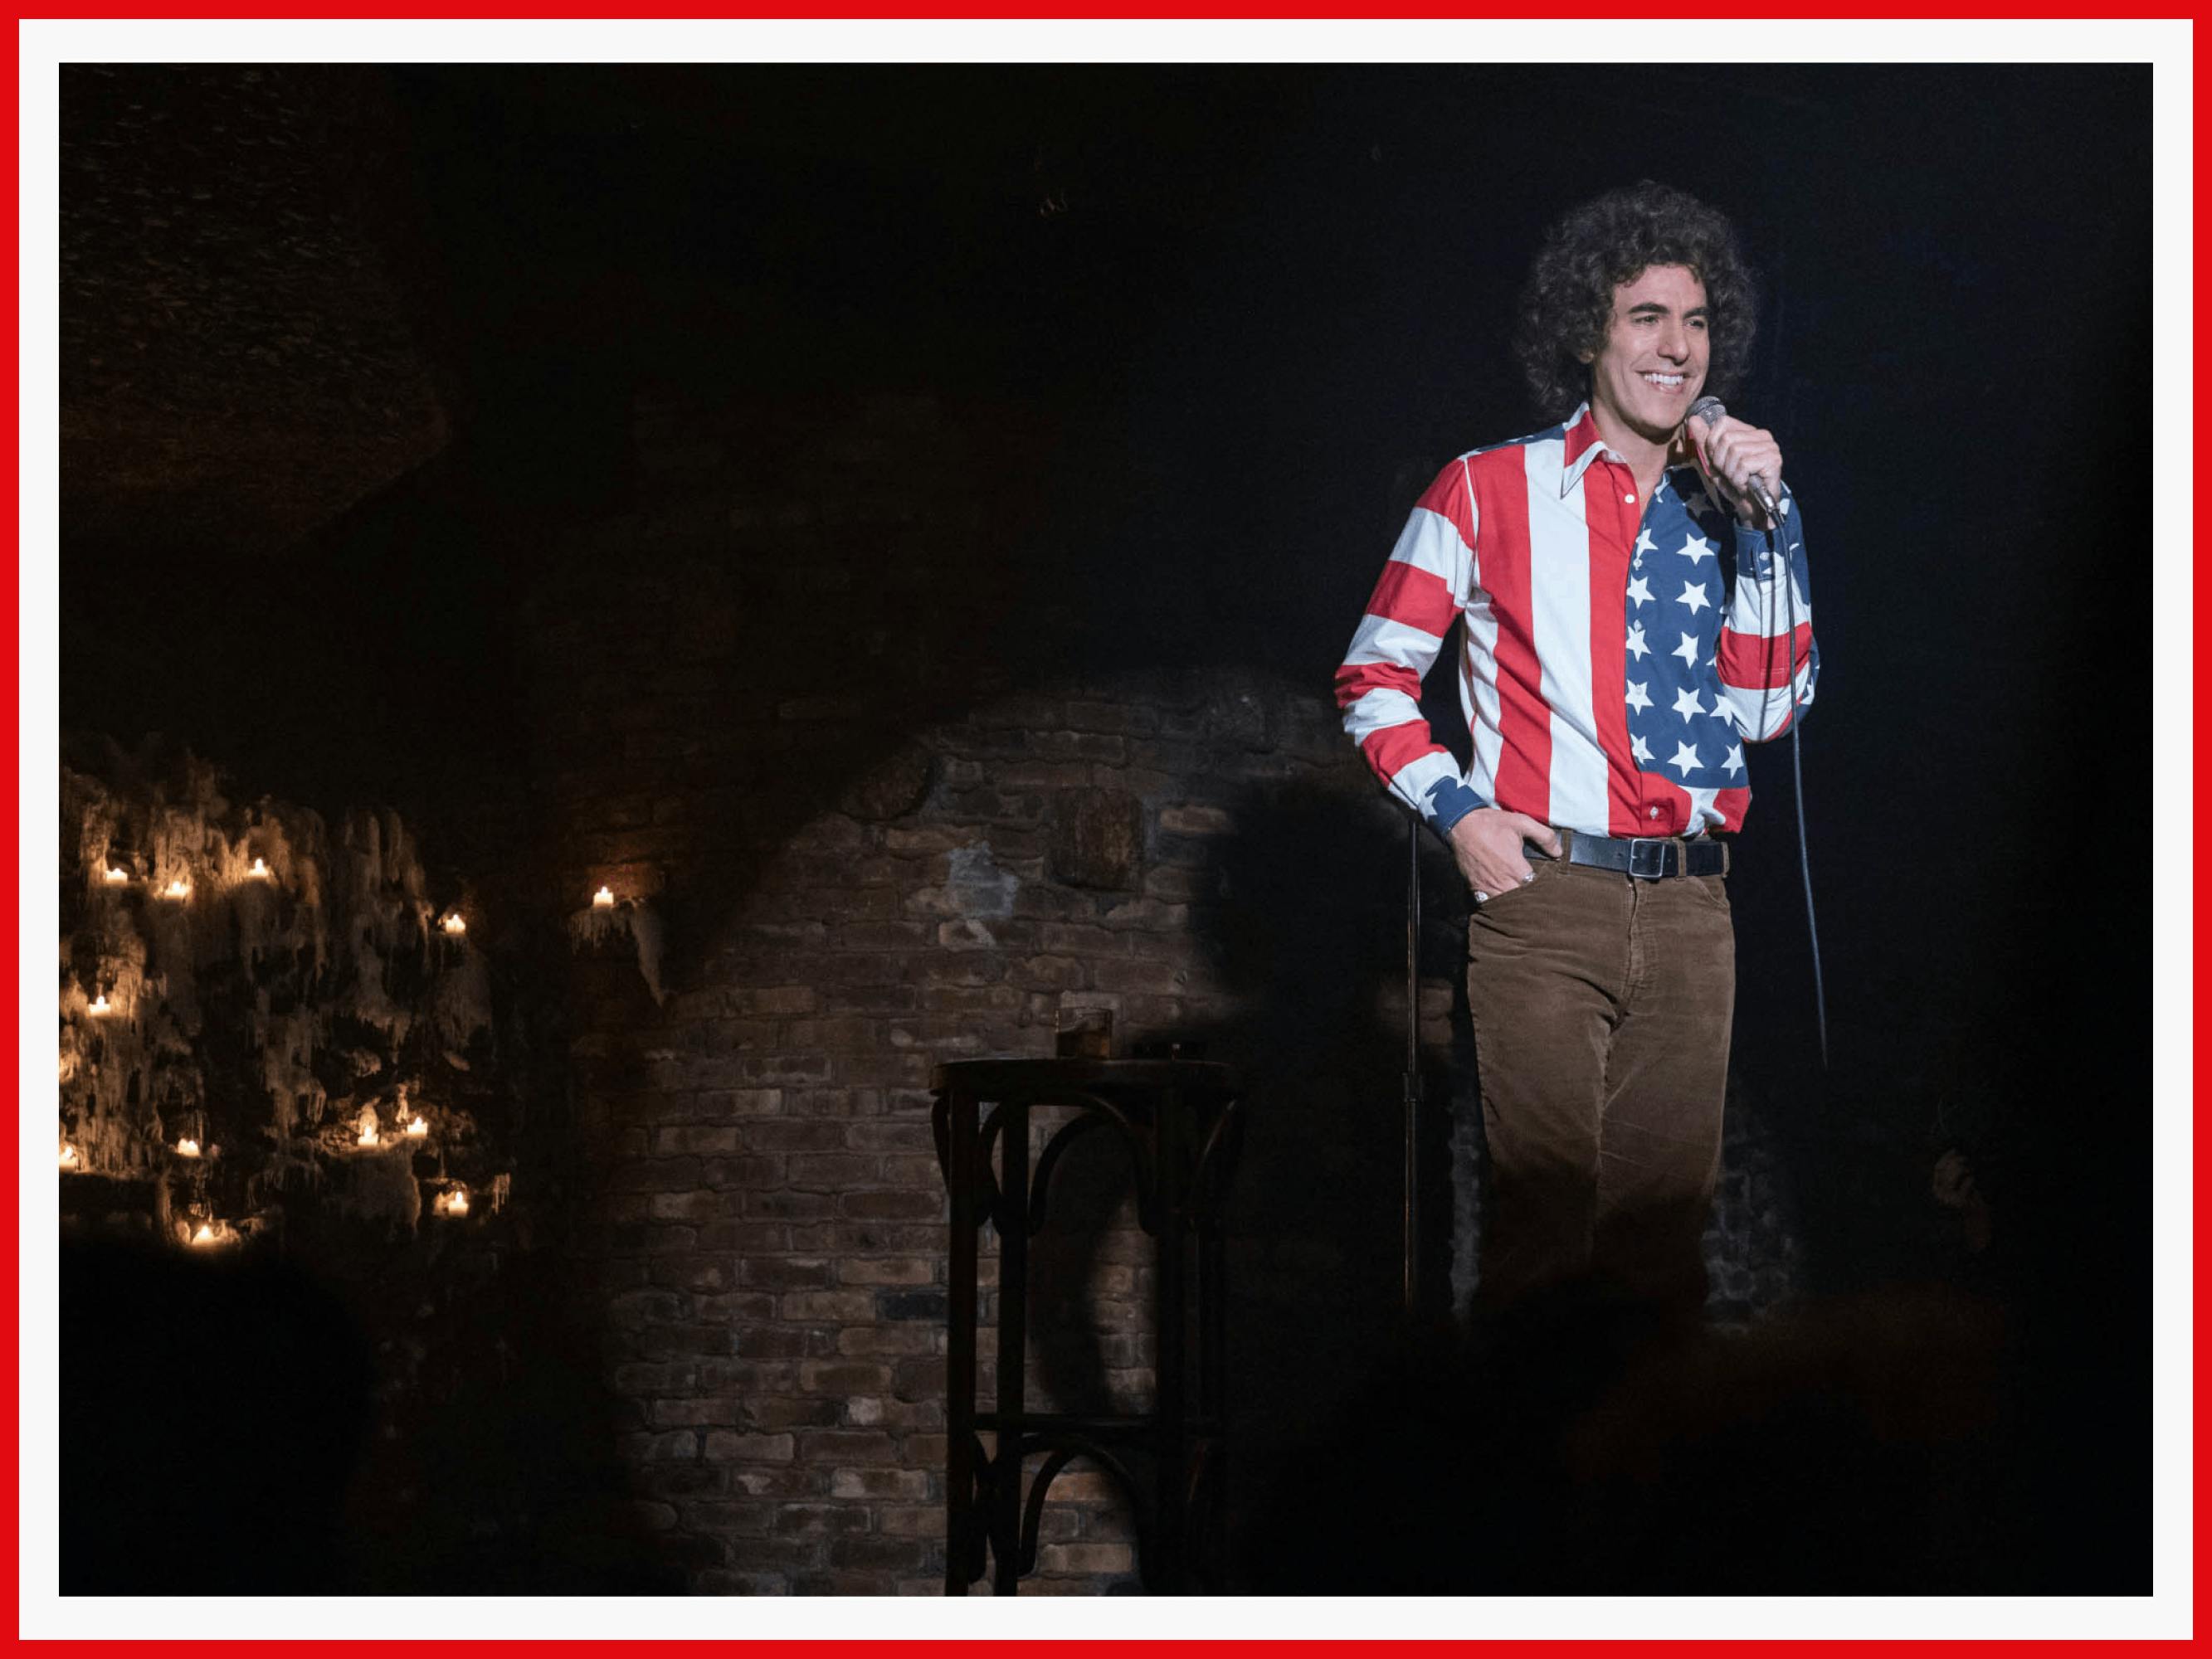 Sacha Baron Cohen, as Abbie Hoffman, stands grinning at a mic, wearing an extremely loud American-flag shirt. The sleeves are stripes, the cuffs are stars. 